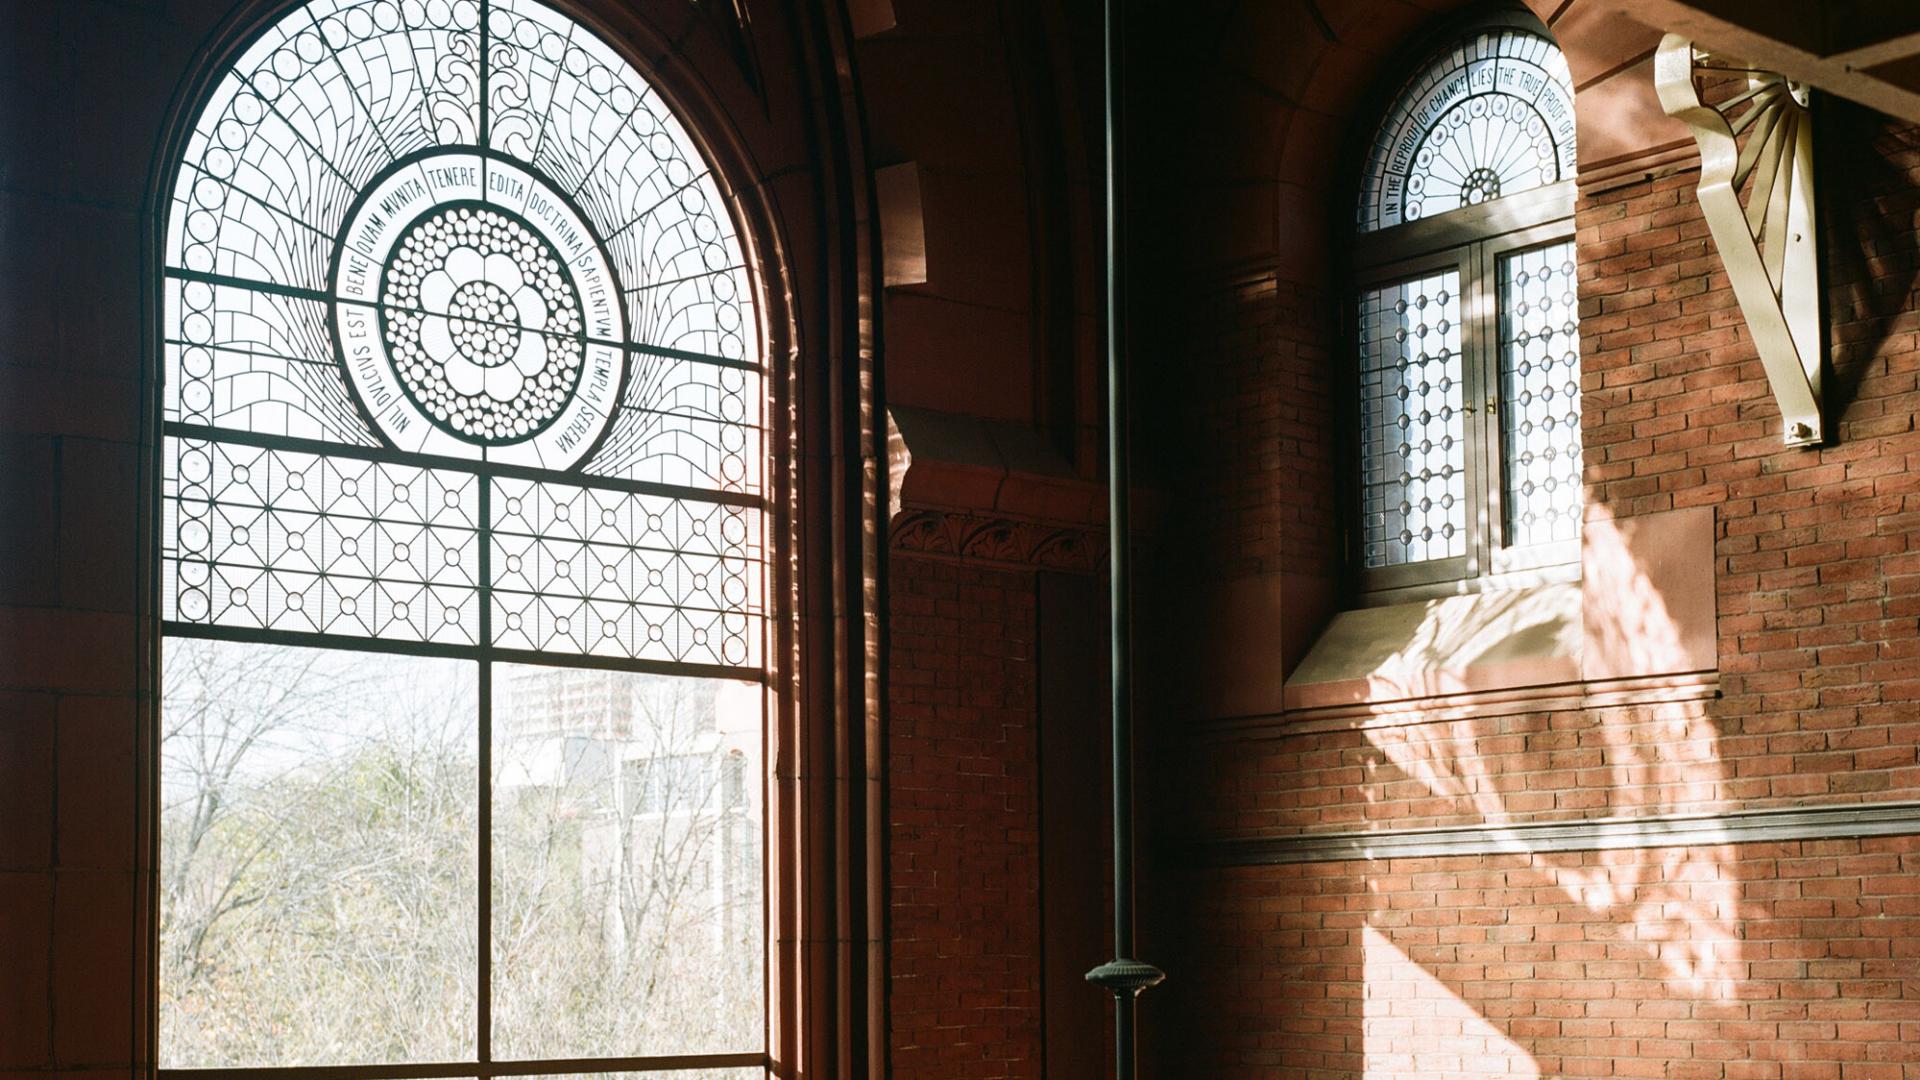 Interior shot of Library, stained glass window, brick wall